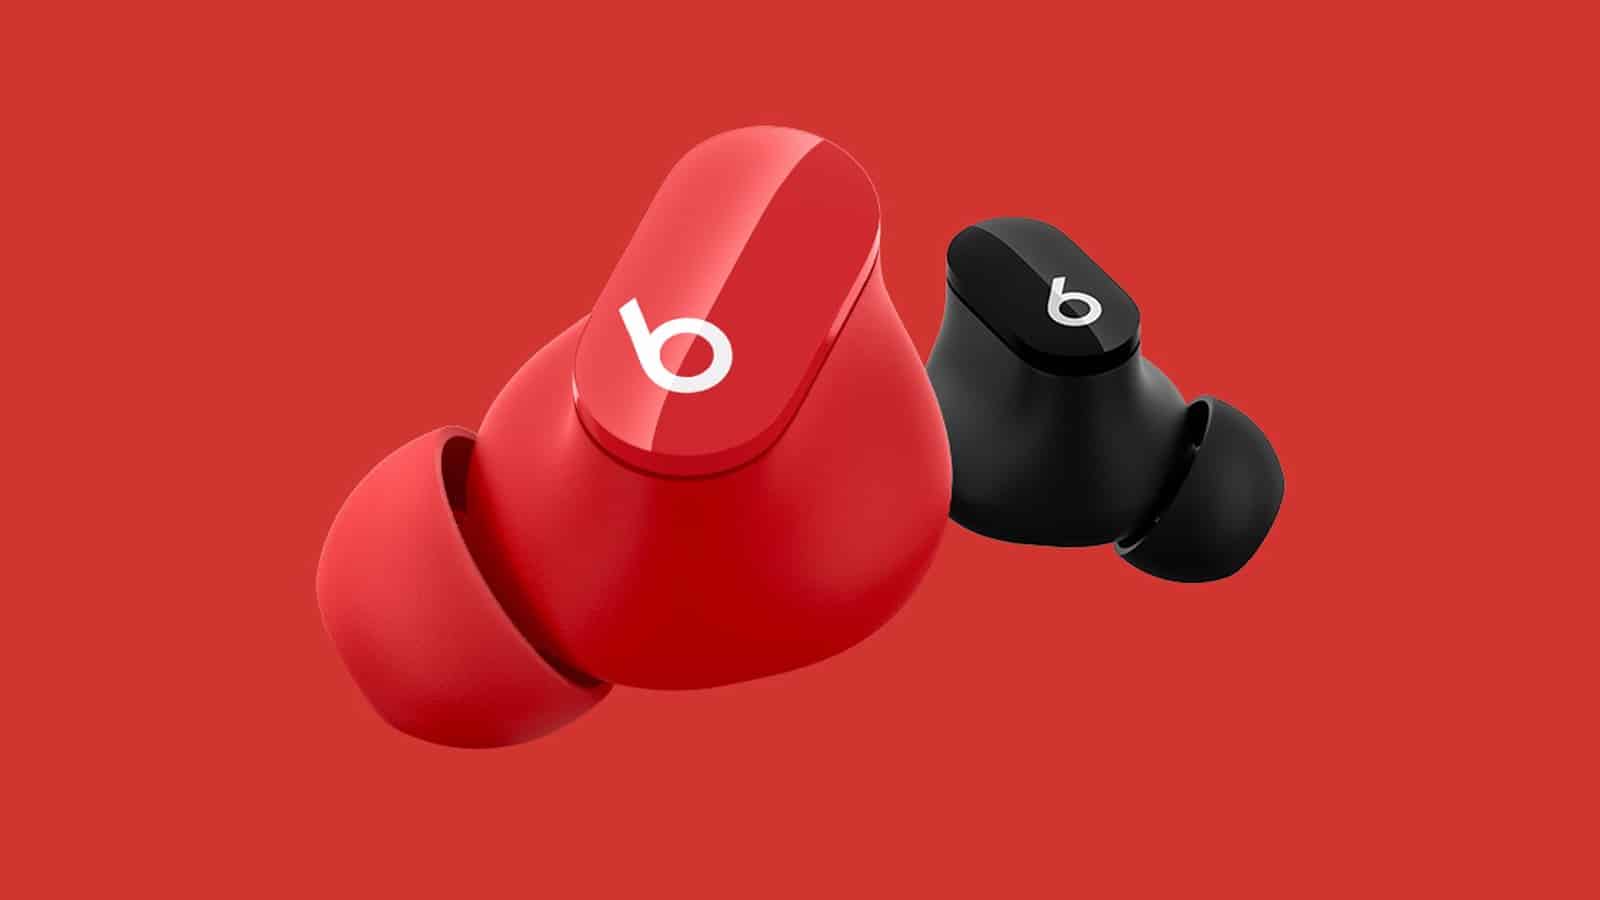 Beats Studio Buds now available for $149.99 at Apple stores